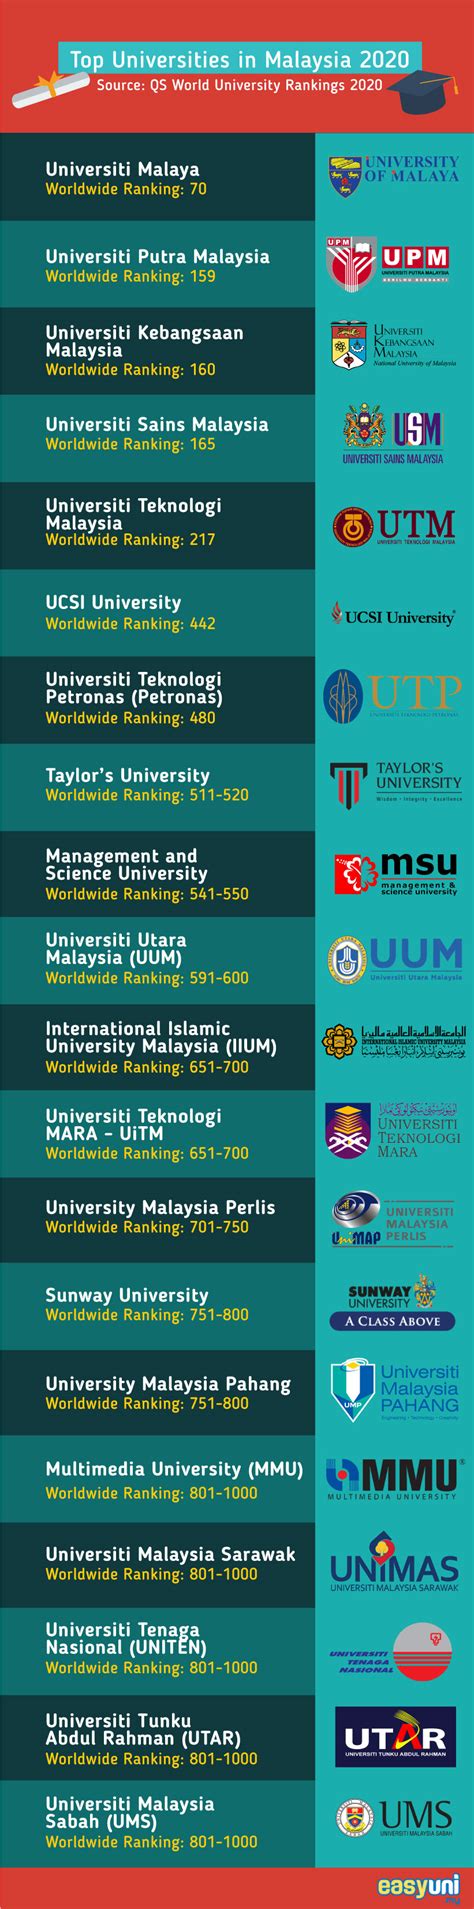 Malaysian universities are known for producing credible and outstanding academic the rankings for 2019 are also listed so you can see how each university made its improvement to the top. Apu Malaysia World Ranking - Ratulangi